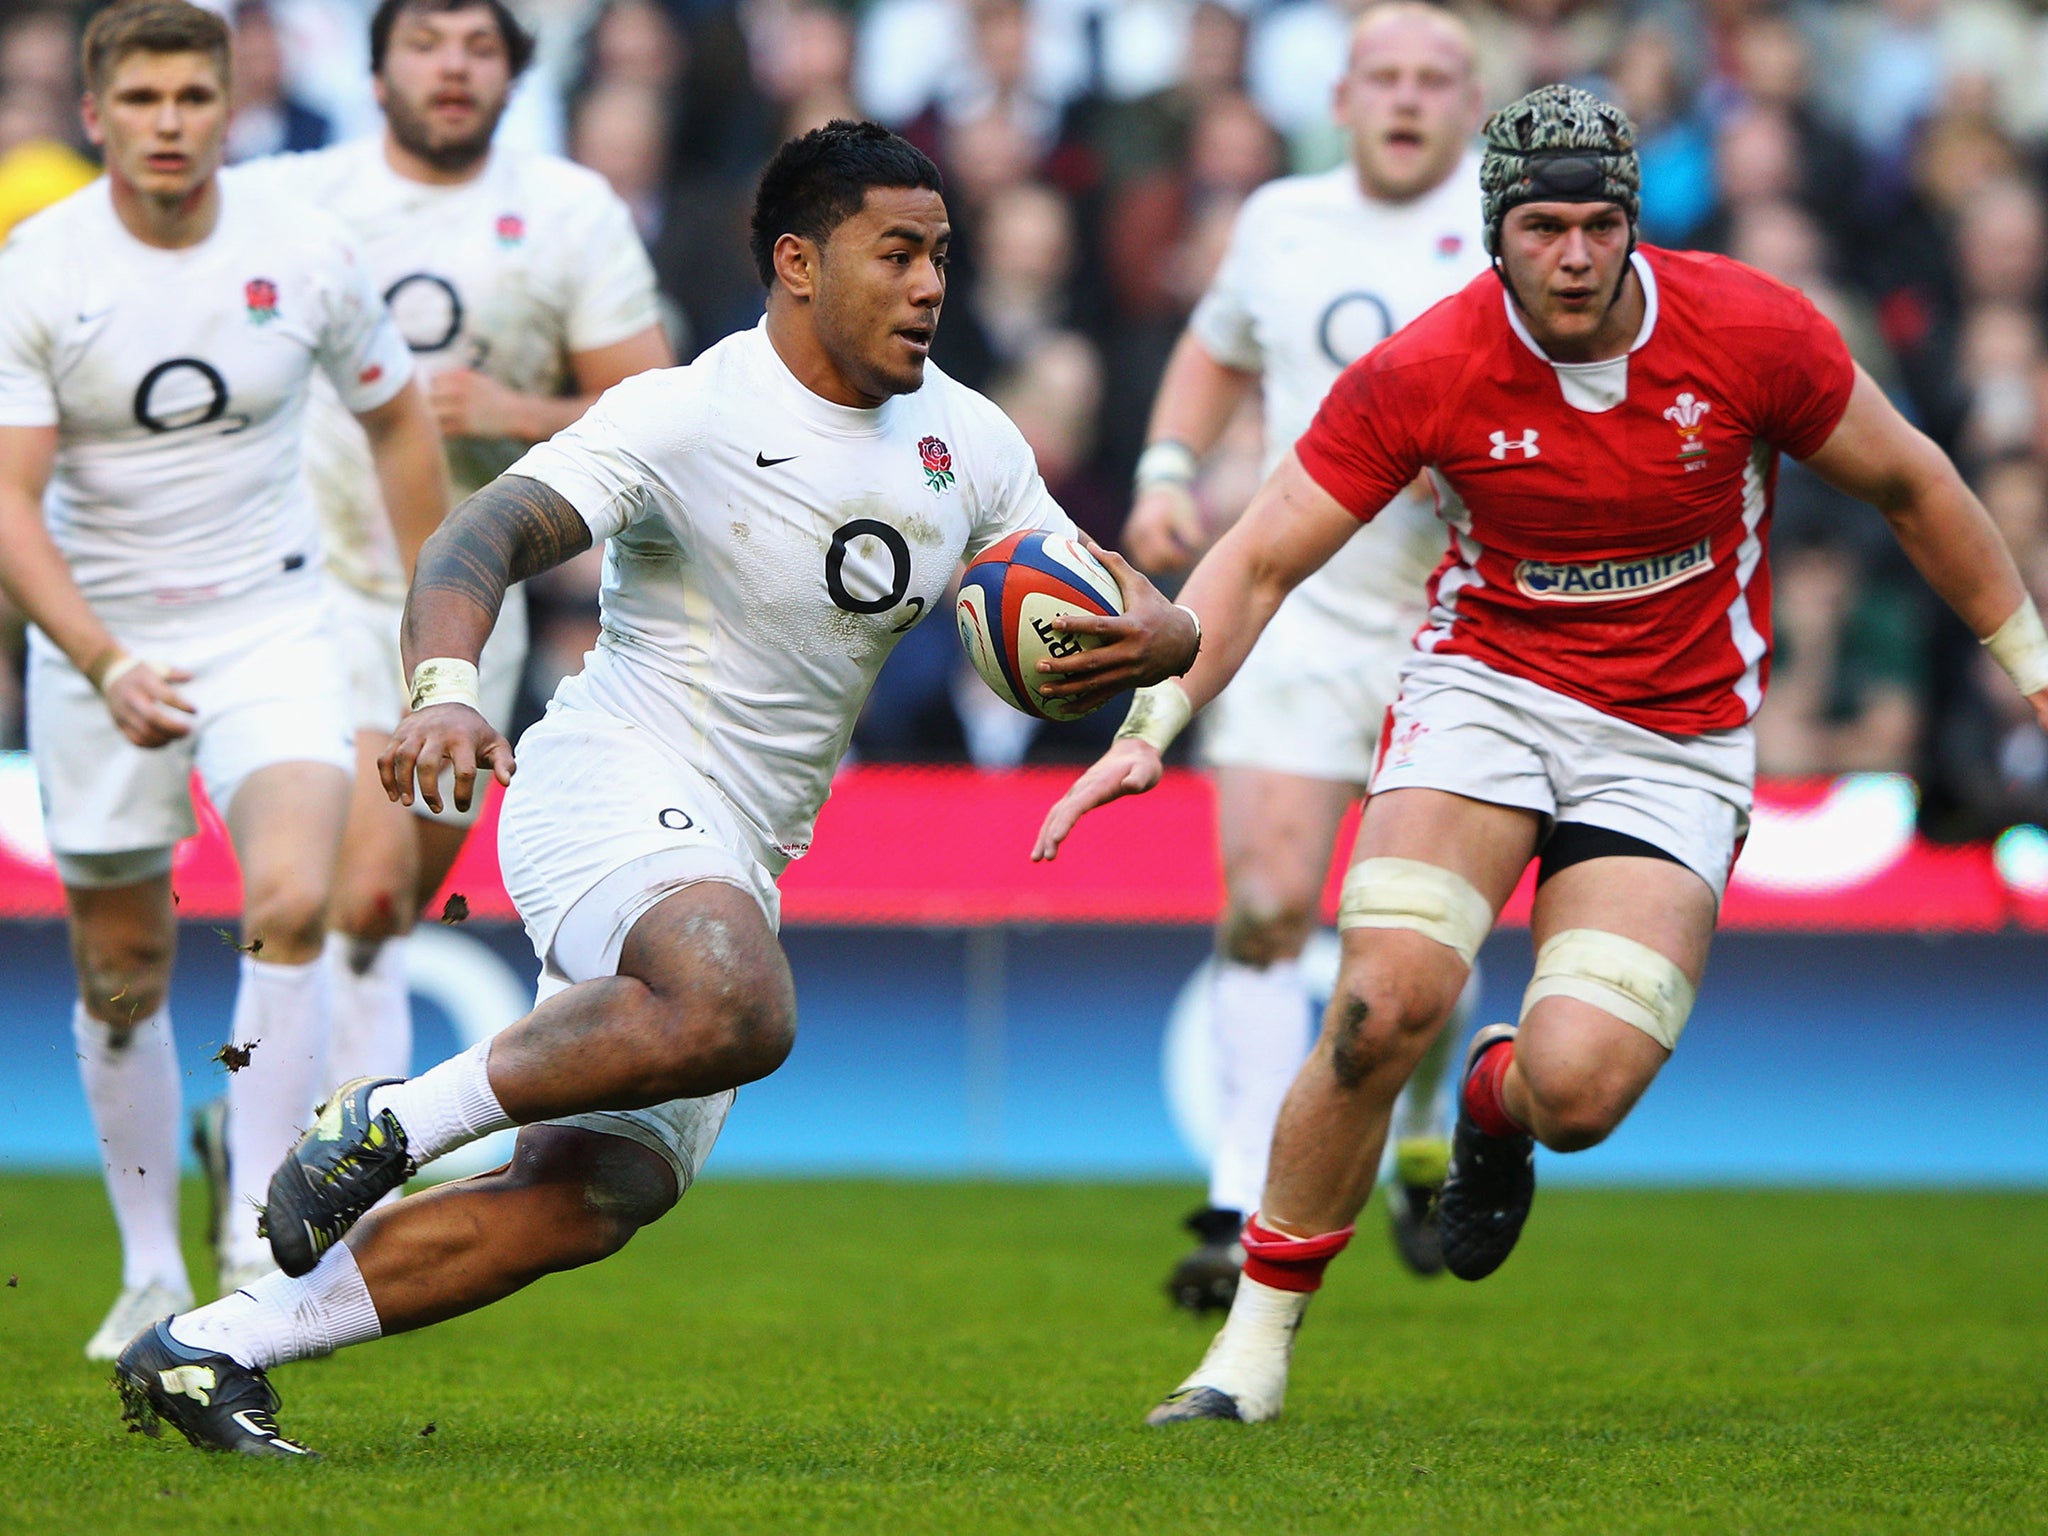 Tuilagi was forced to call off an appearance for Leicester due to injury